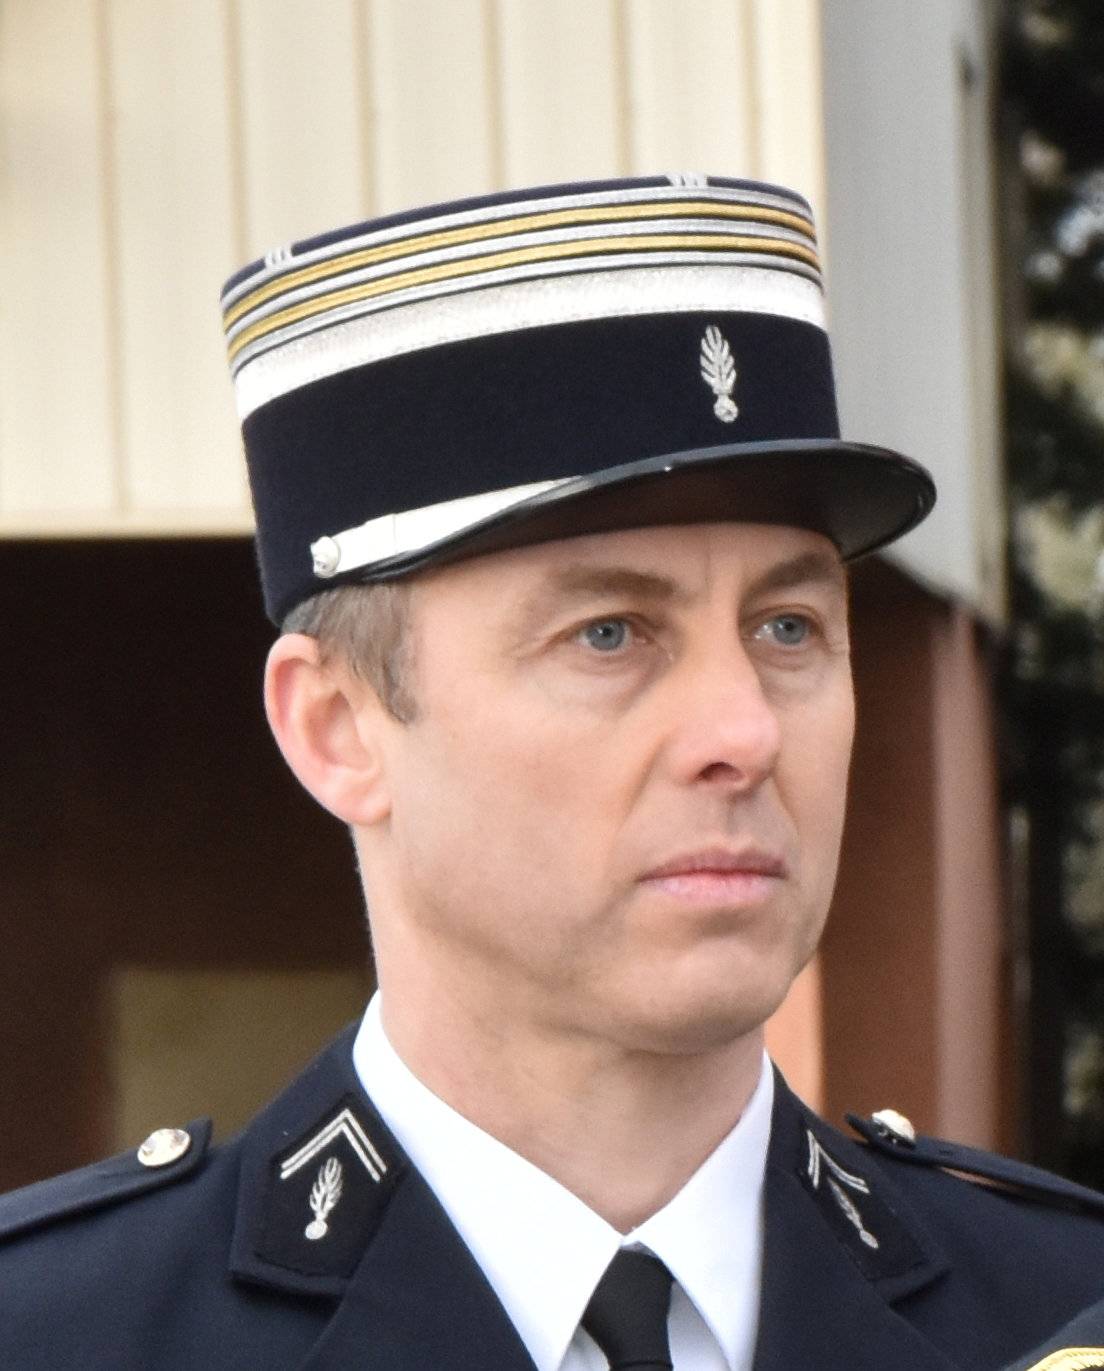 A photo released by the French Gendarmerie shows Lieutenant-Colonel Arnaud Beltrame